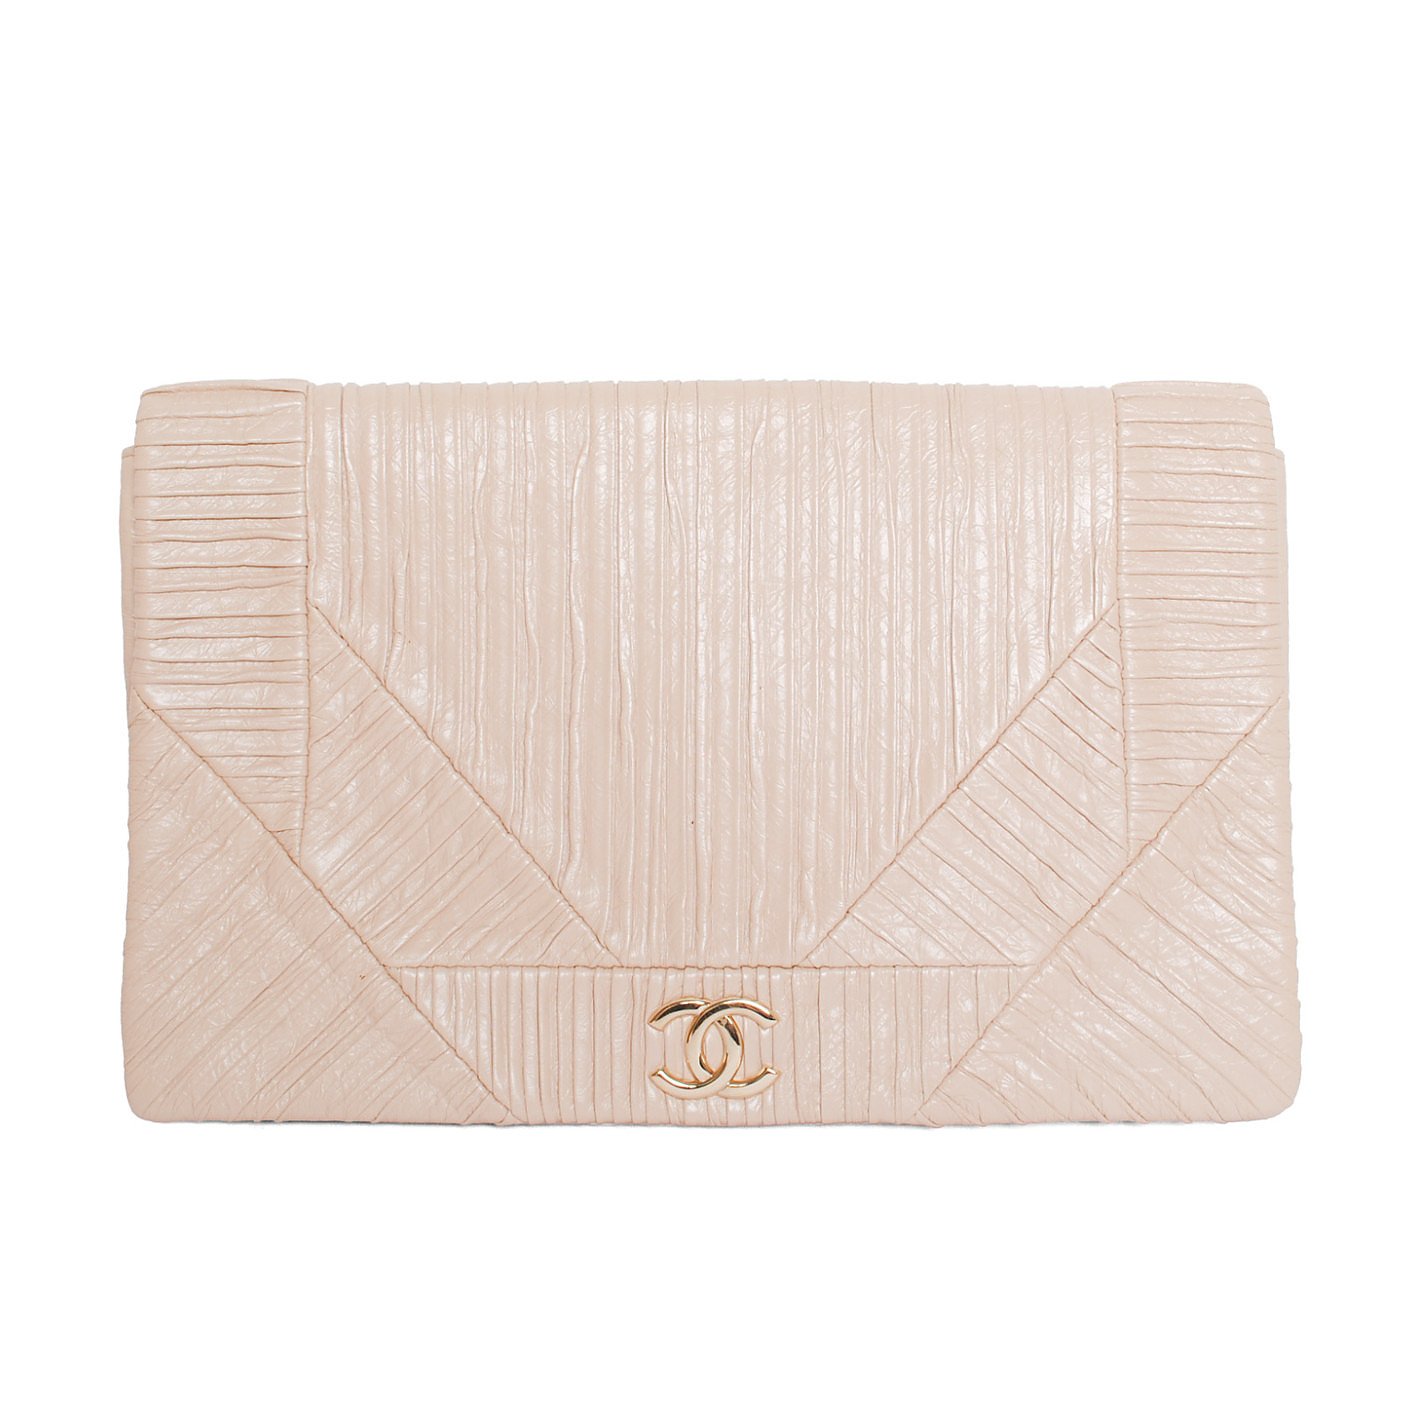 CHANEL Textured Large Clutch